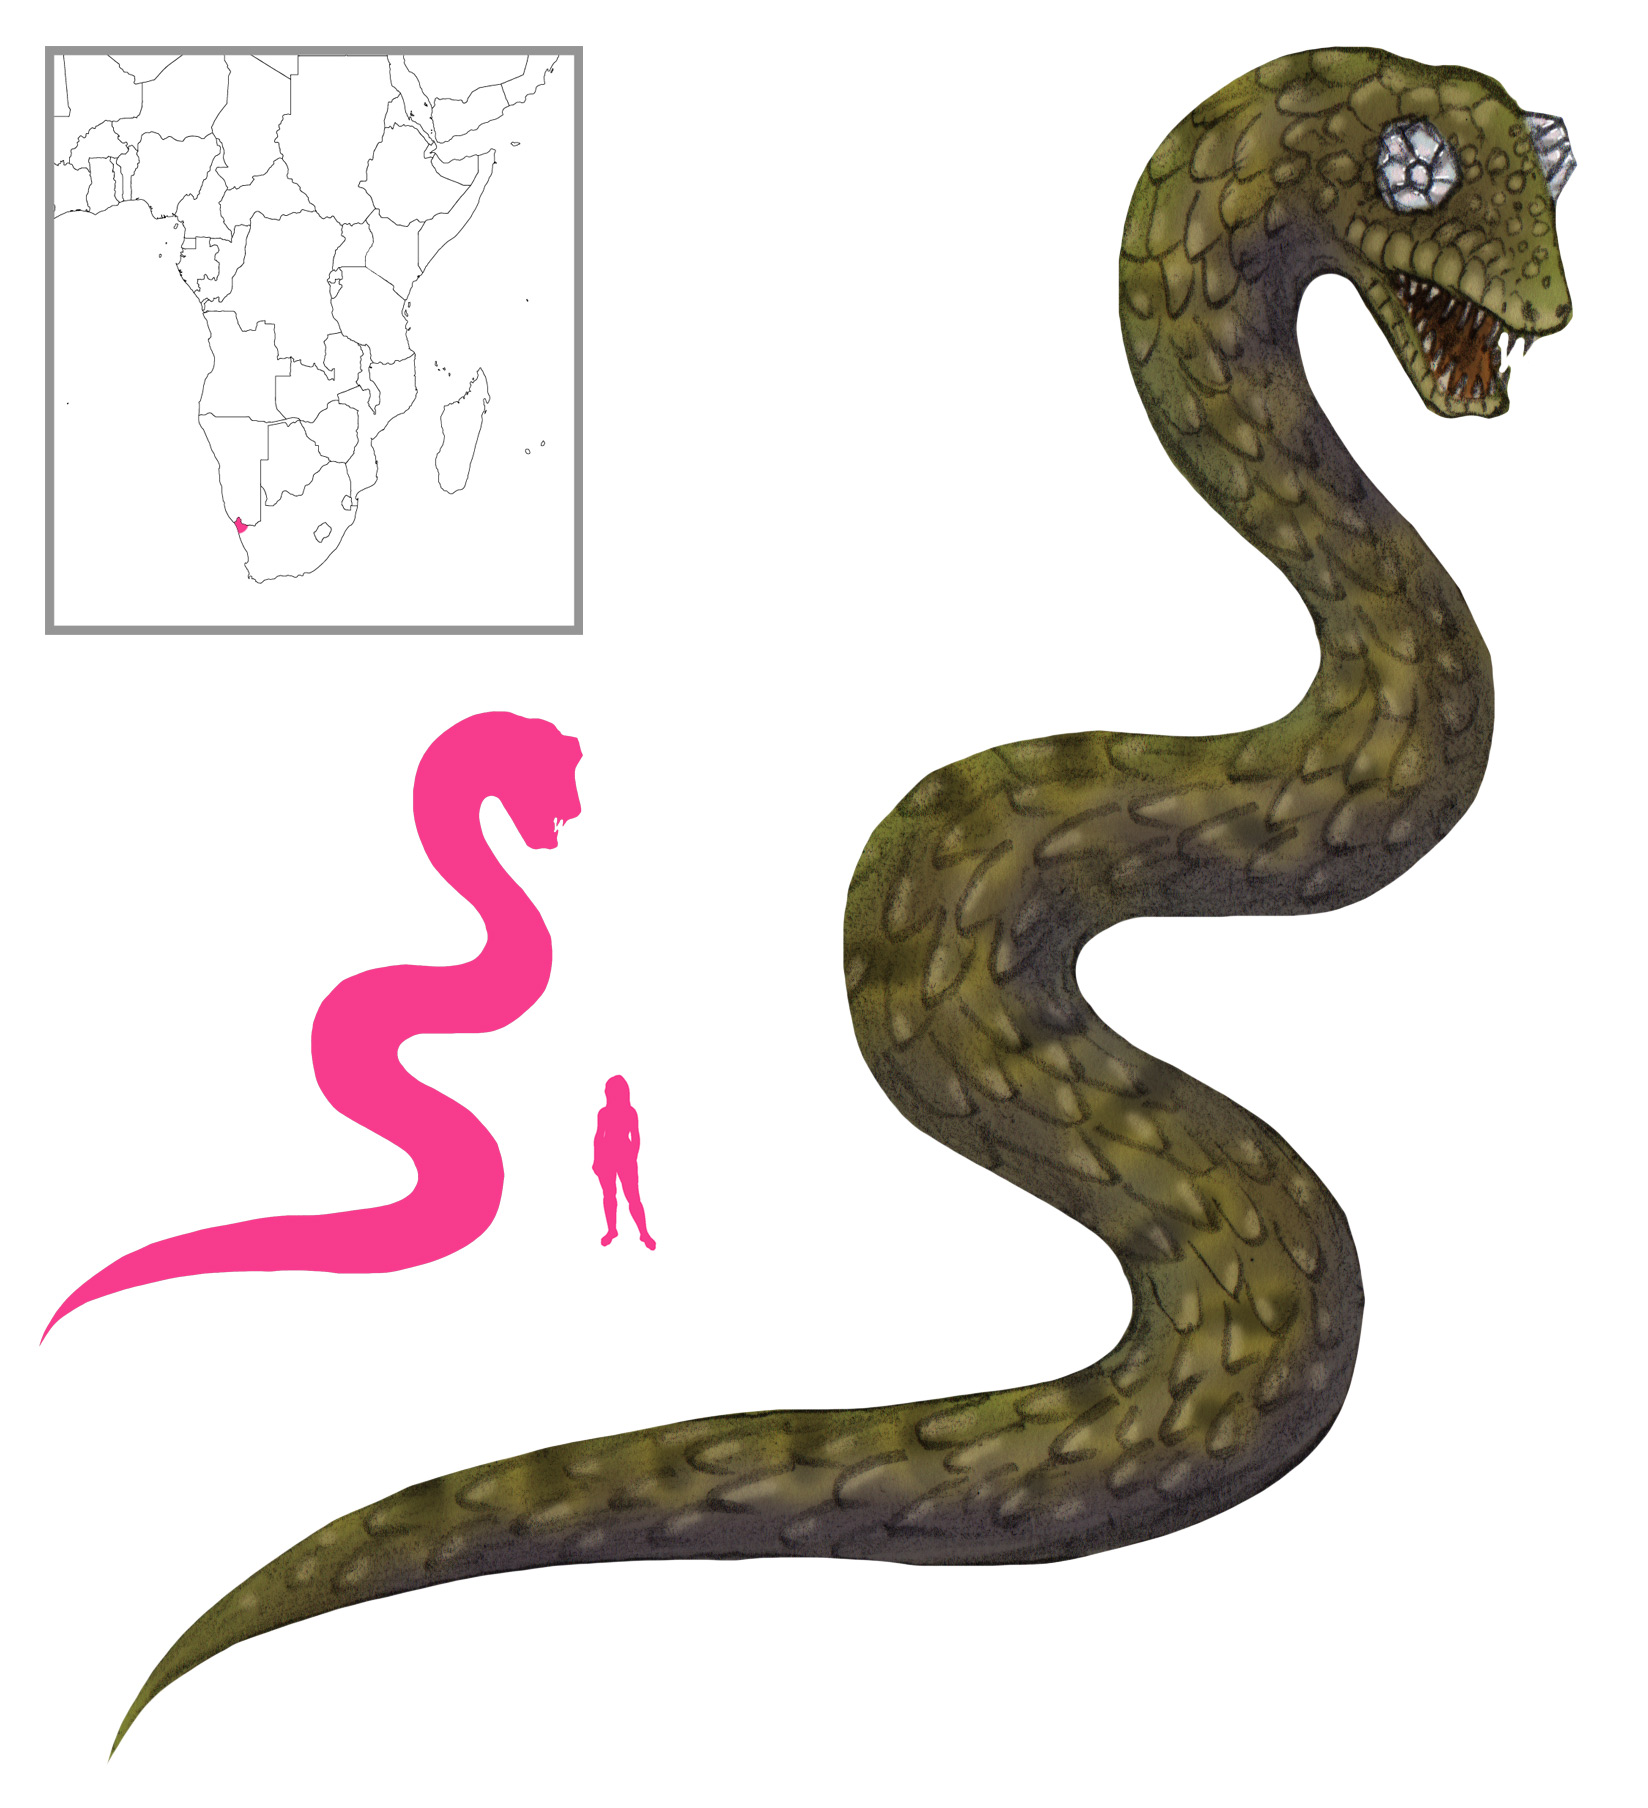 File:The Head and the Tail of the Serpent, from the Fables of La